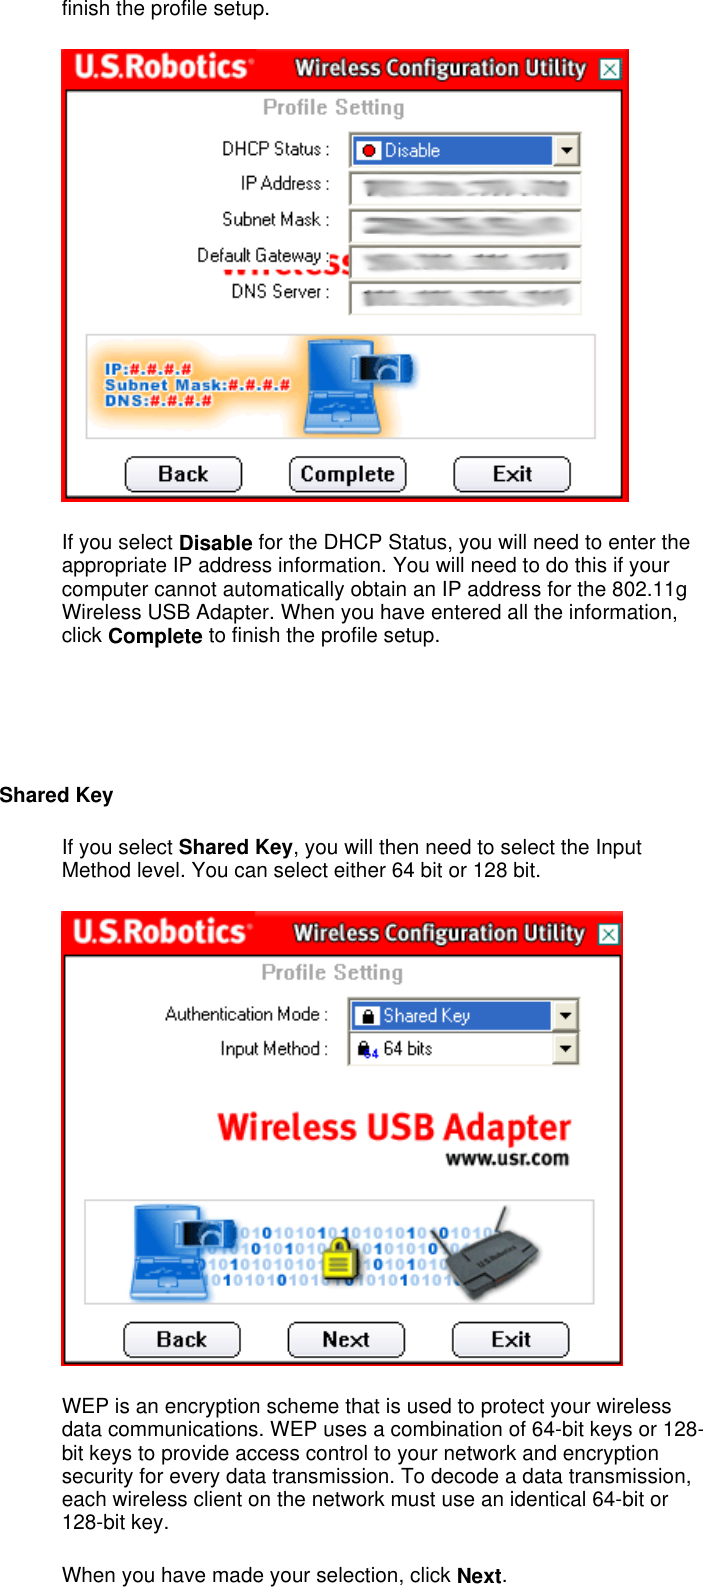 finish the profile setup.  If you select Disable for the DHCP Status, you will need to enter the appropriate IP address information. You will need to do this if your computer cannot automatically obtain an IP address for the 802.11g Wireless USB Adapter. When you have entered all the information, click Complete to finish the profile setup.     Shared Key If you select Shared Key, you will then need to select the Input Method level. You can select either 64 bit or 128 bit.   WEP is an encryption scheme that is used to protect your wireless data communications. WEP uses a combination of 64-bit keys or 128-bit keys to provide access control to your network and encryption security for every data transmission. To decode a data transmission, each wireless client on the network must use an identical 64-bit or 128-bit key. When you have made your selection, click Next.   